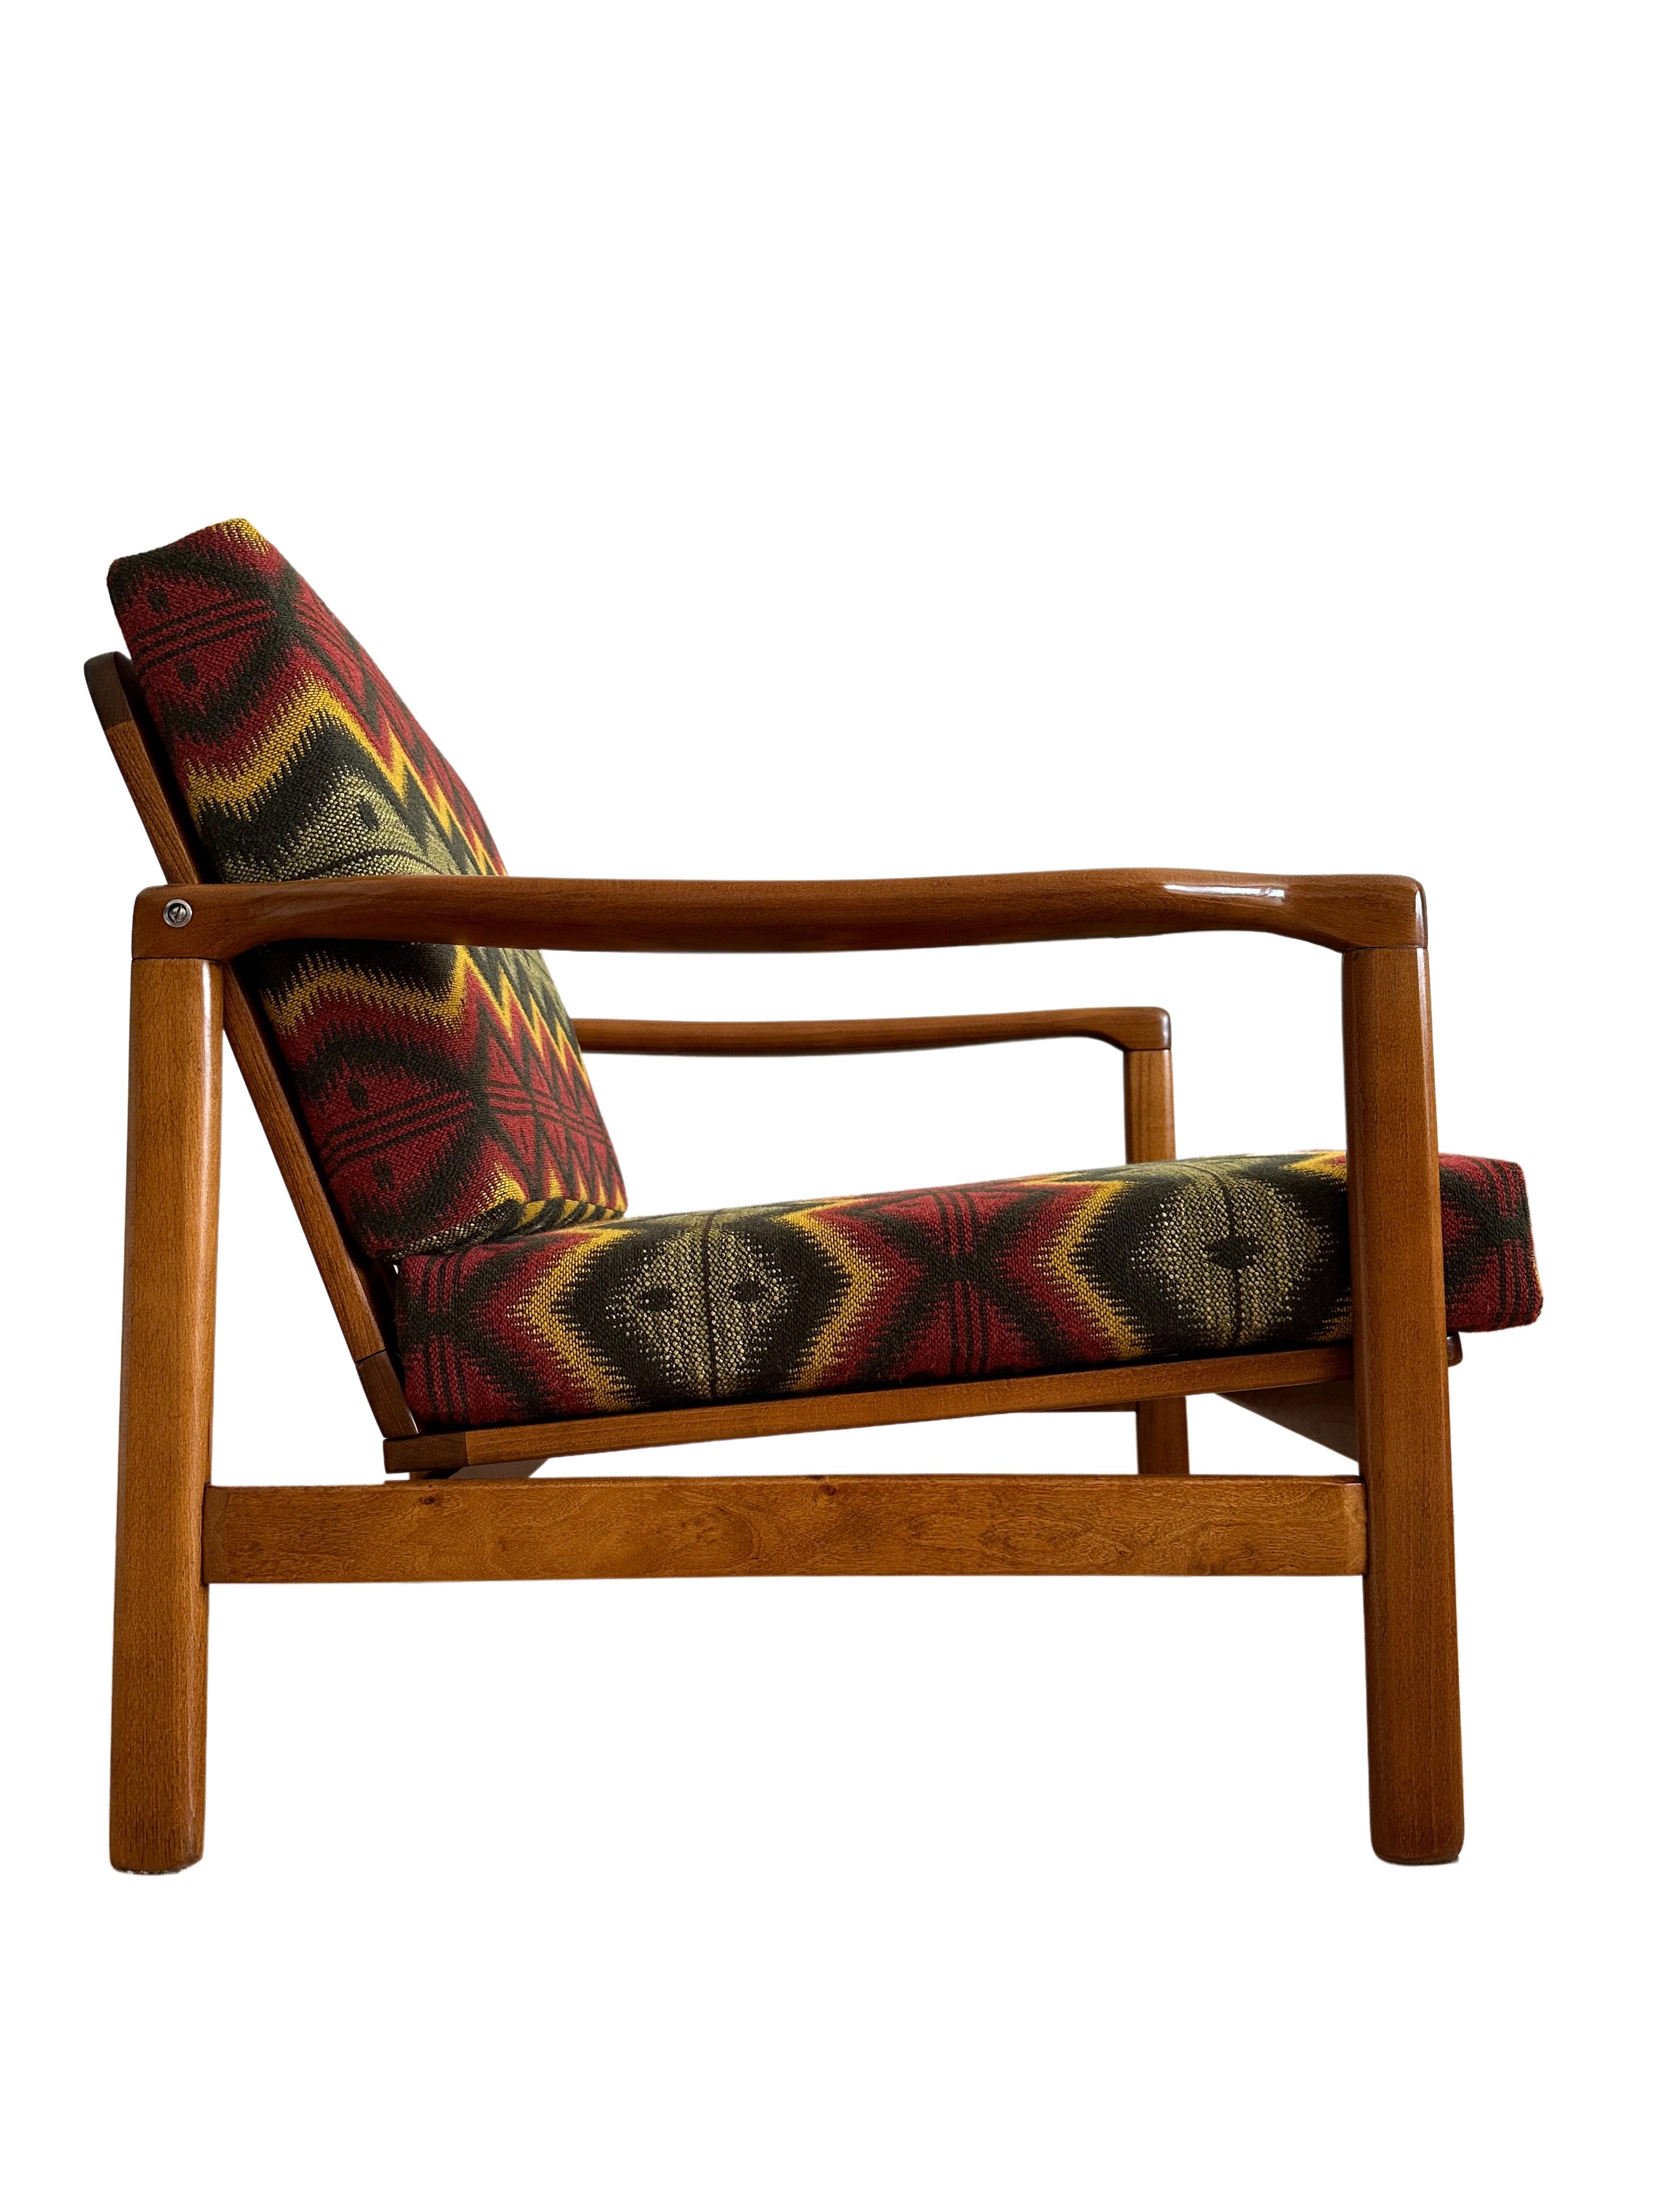 Midcentury Armchair by Zenon Bączyk, Mind the Gap Upholstery, Europe, 1960s For Sale 3